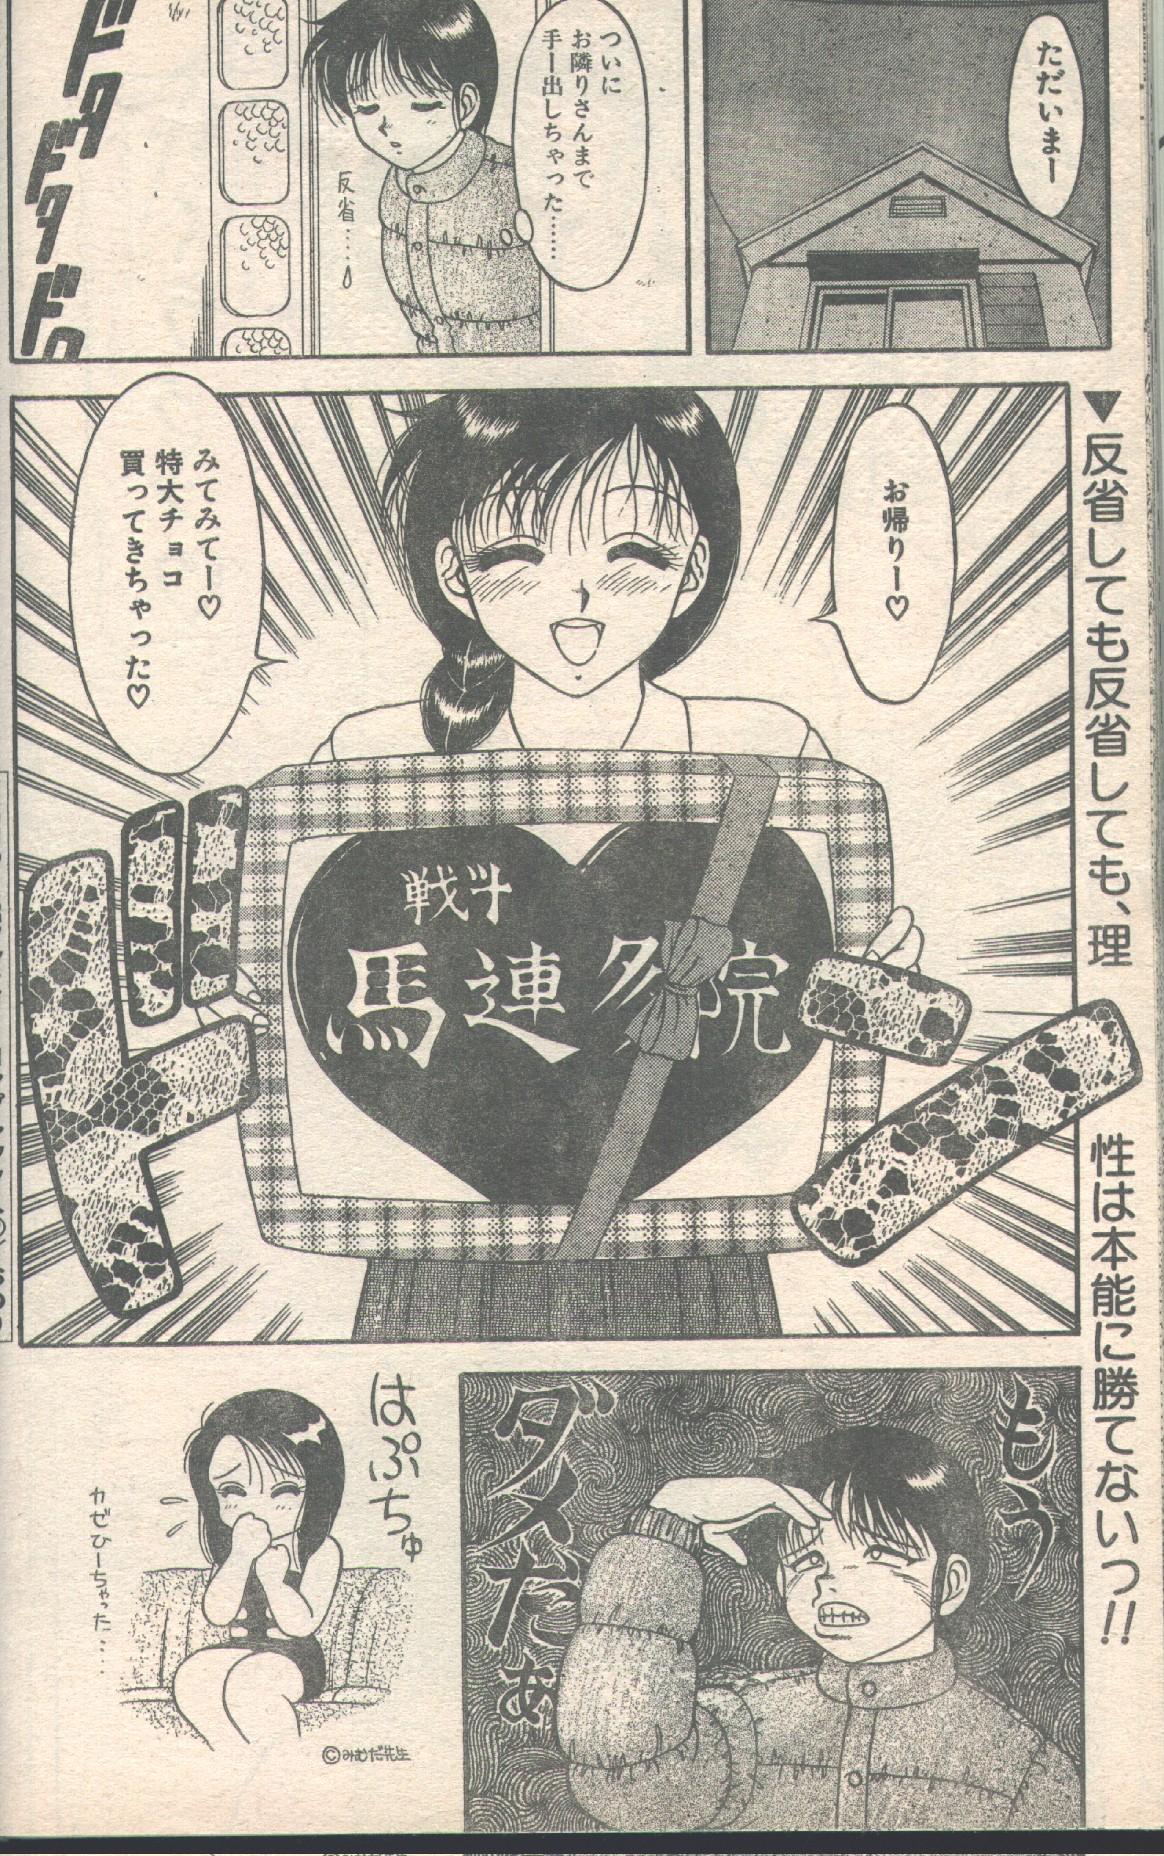 Candy Time 1993-03 [Incomplete] キャンディータイム 1993年03月号 [不完全]